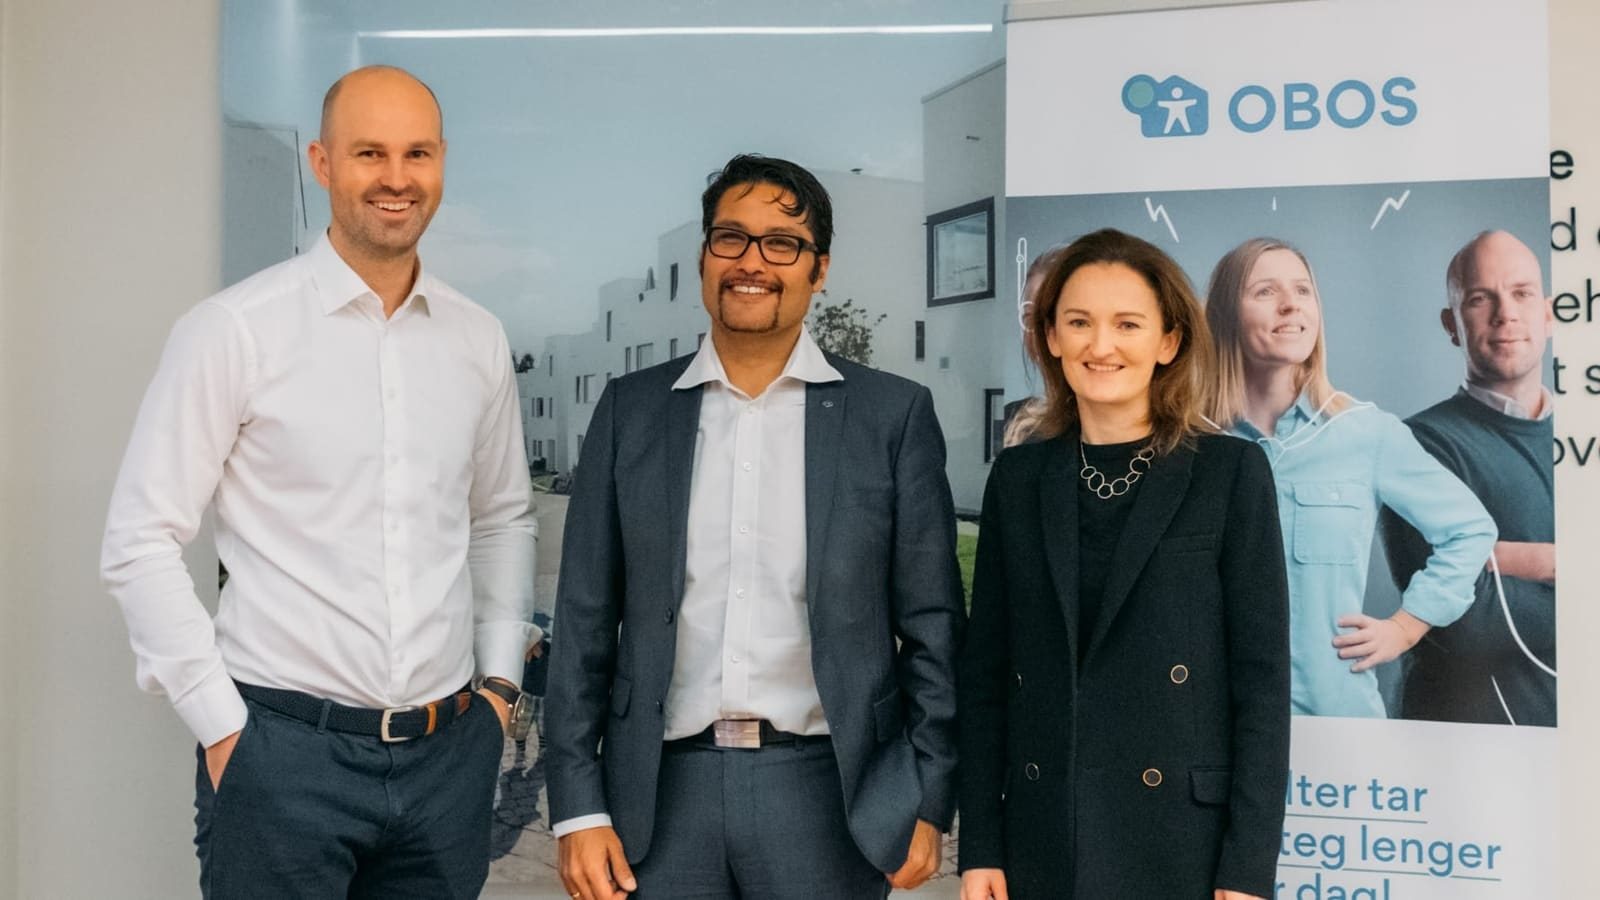 Scandinavian AI-startup Spacemaker and OBOS sign enterprise agreement worth more than 2 Million Euros